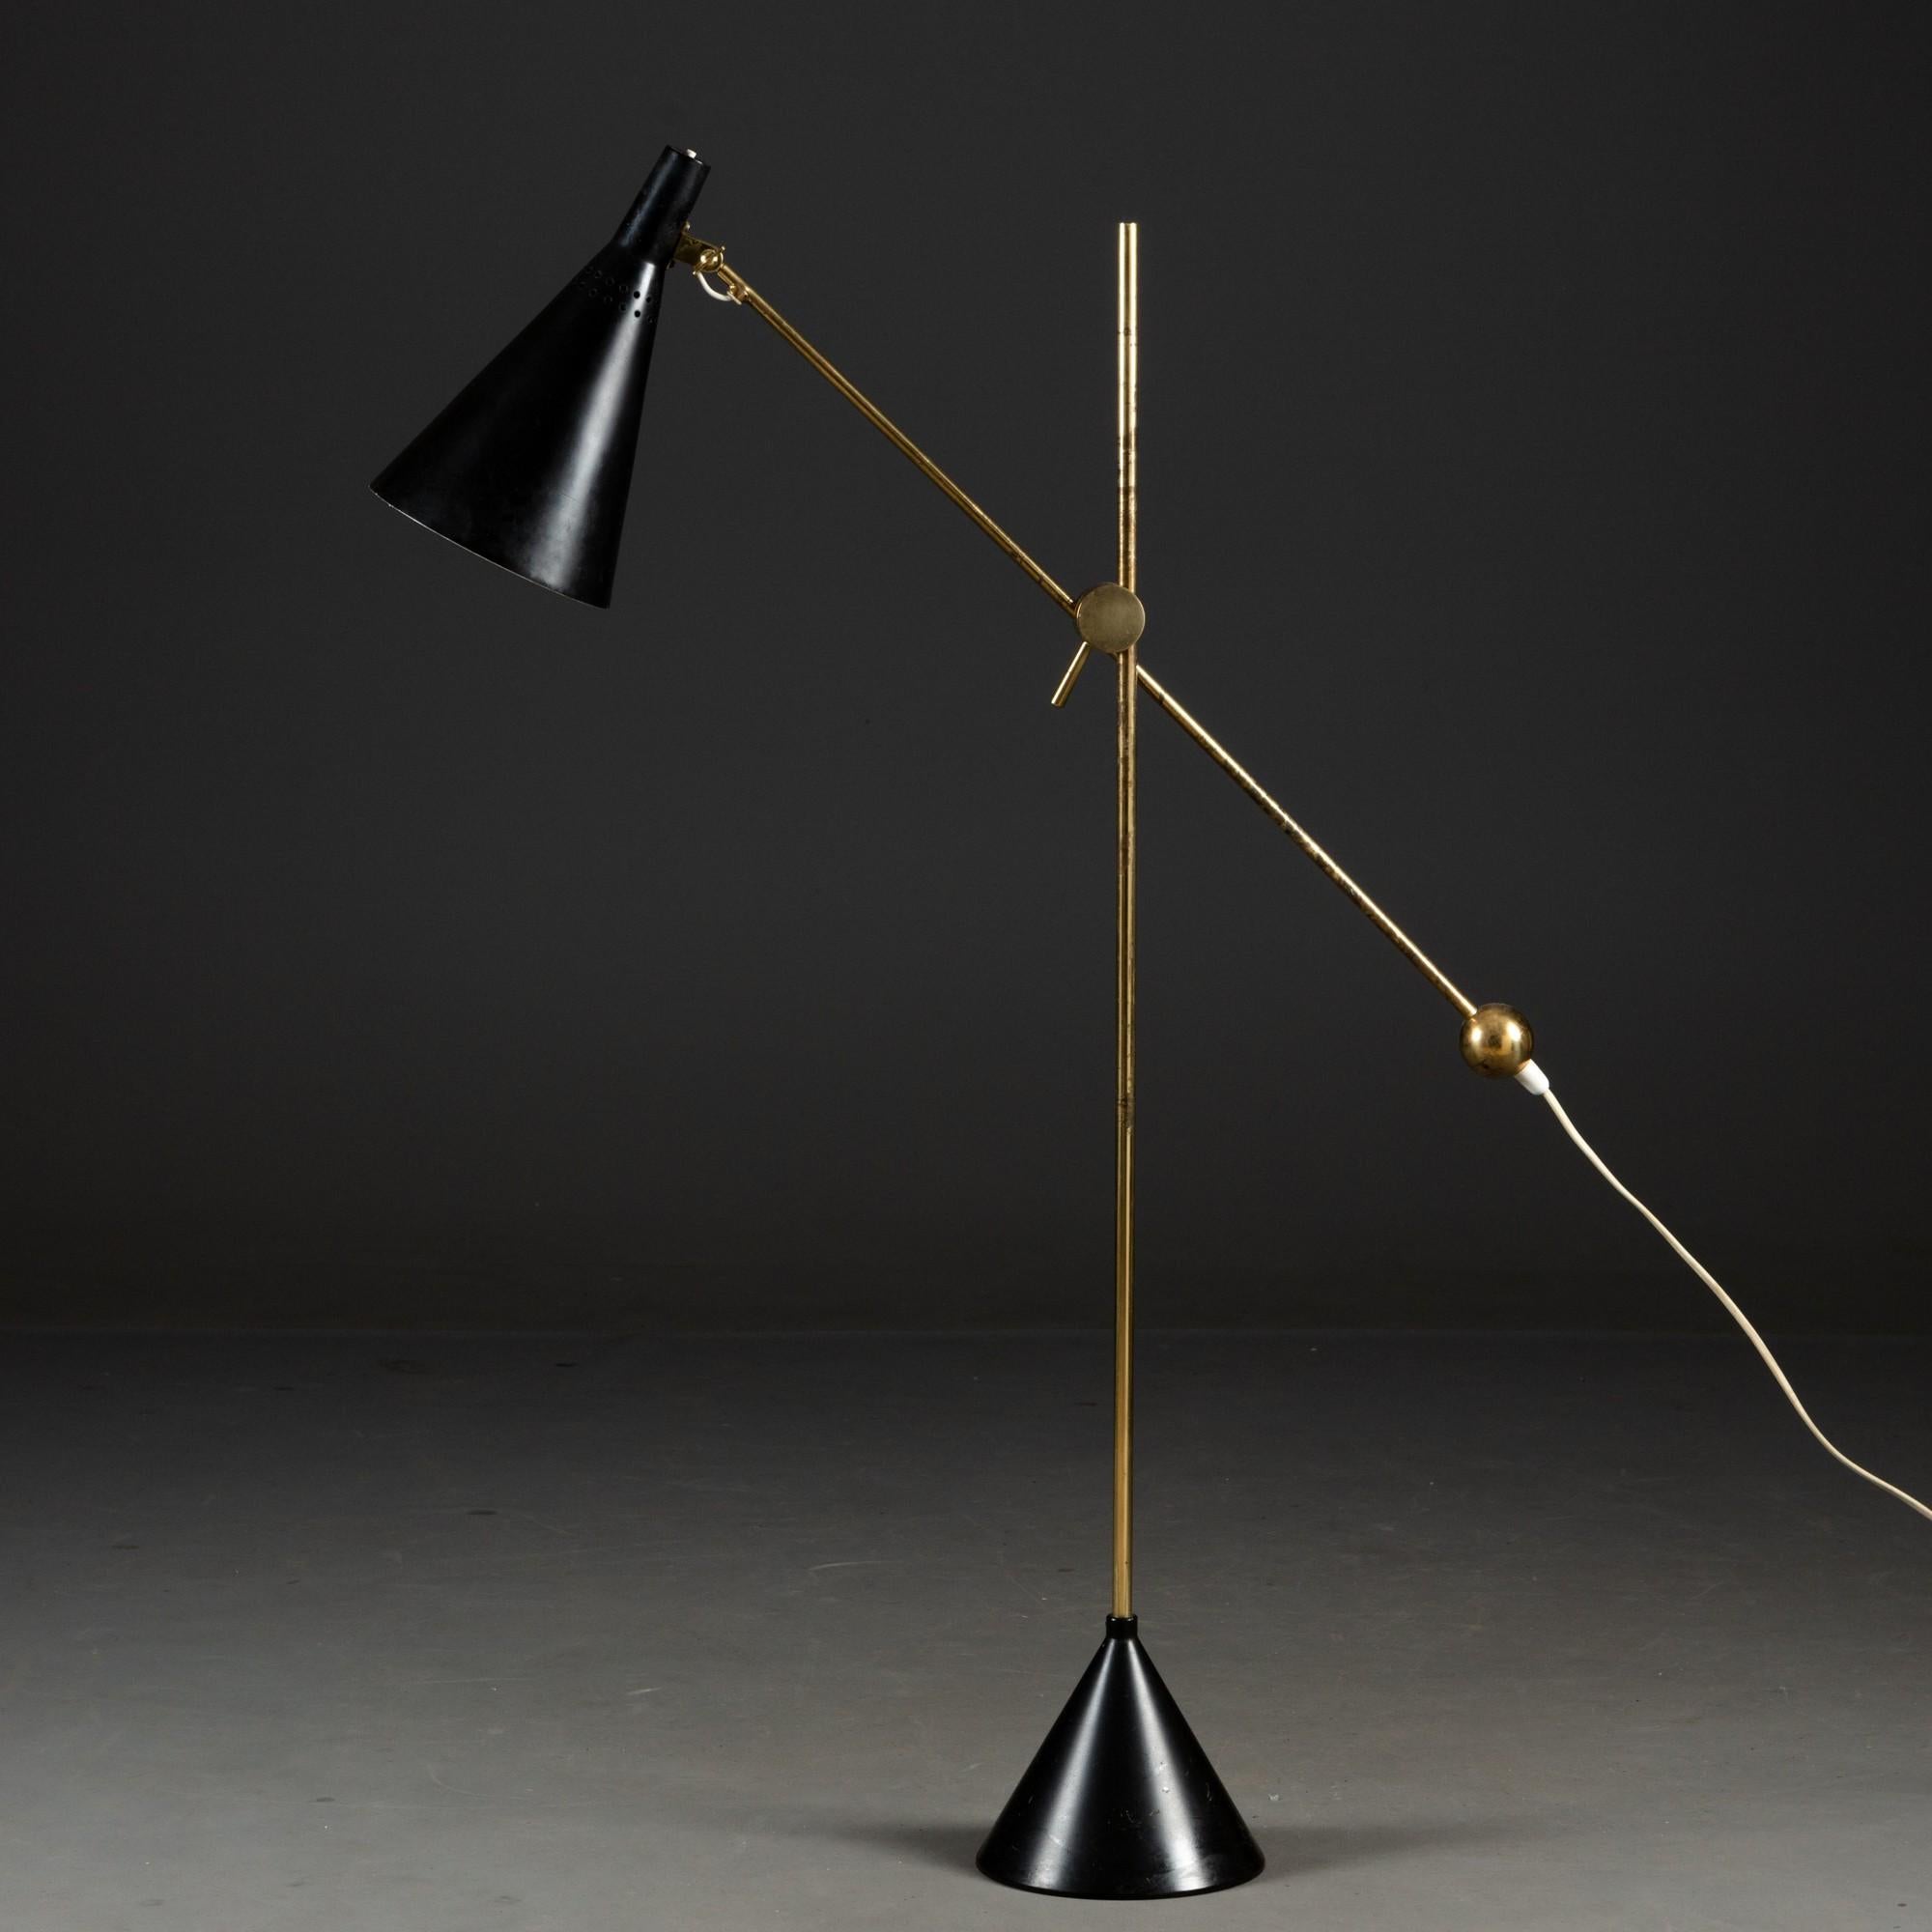 Tapio Wirkkala Model K10-11 Floor / Table Lamp, made by Idman, Finland in the 1950s. Brass and painted metal. Height if the lamp is adjustable - can be used as a floor or a table lamp. Stamped with makers mark. In working order but local rewiring is